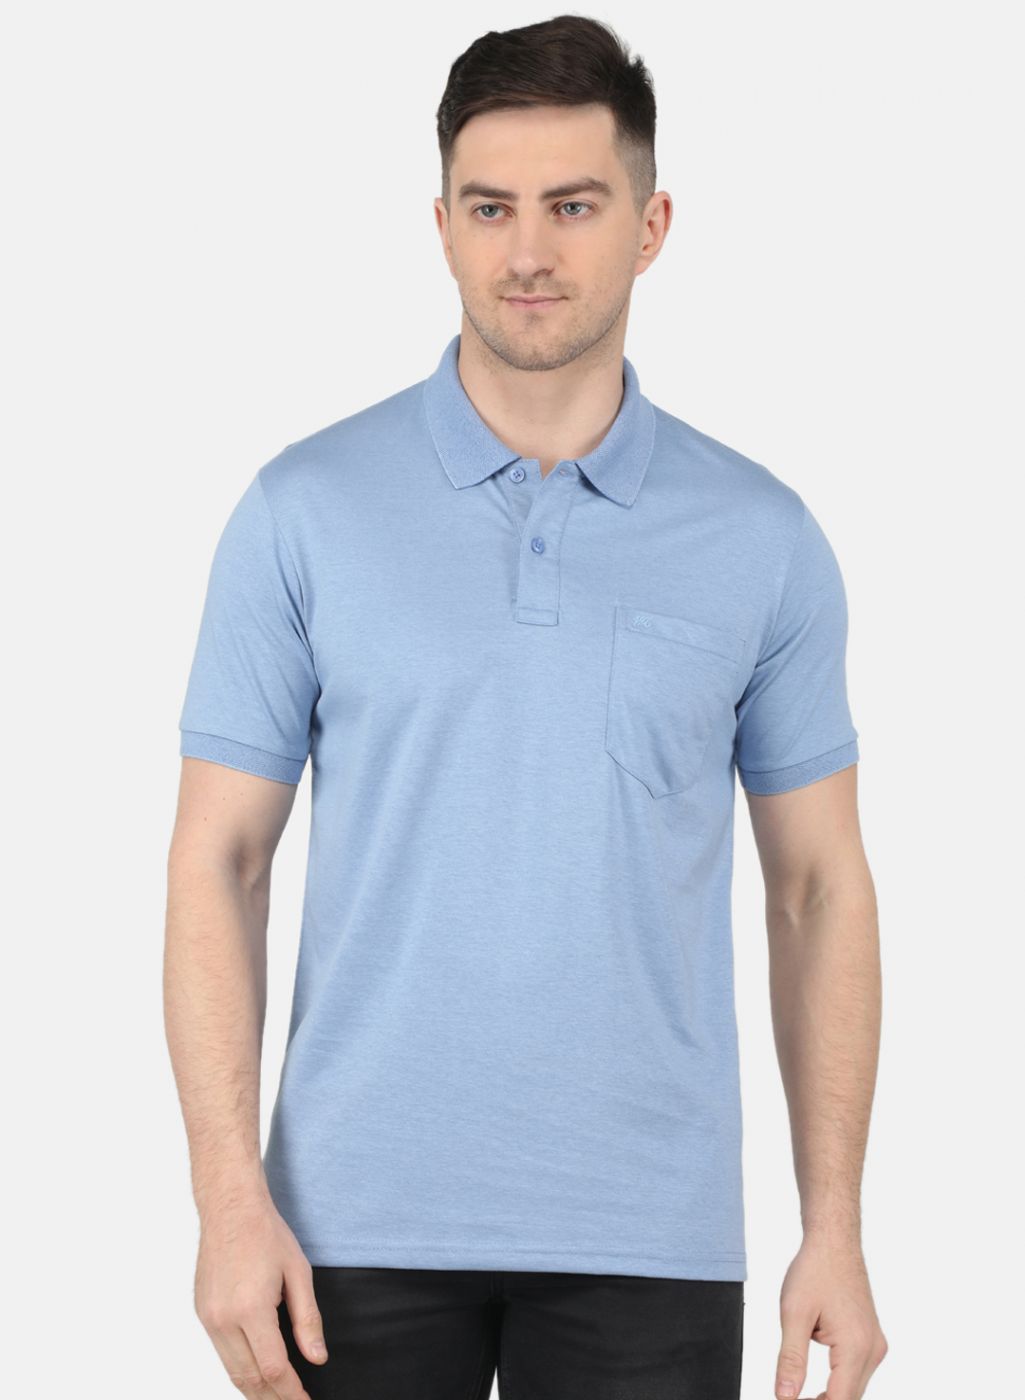 Blue Shirts - Buy Blue Shirt for Men Online in India